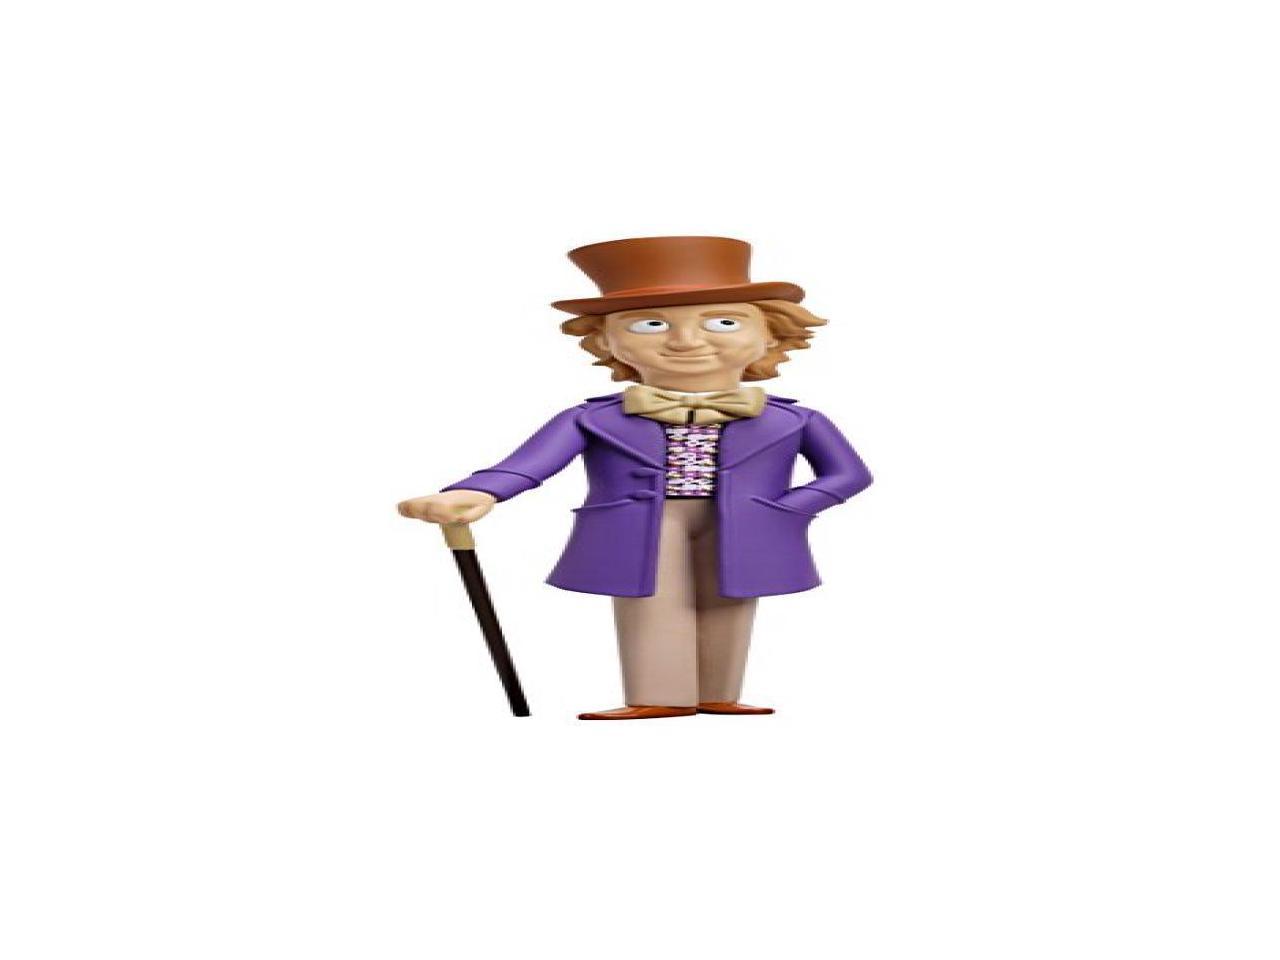 Funko Vinyl Idolz Willy Wonka-willy Wonka Action Figure 2day Ship for sale online 